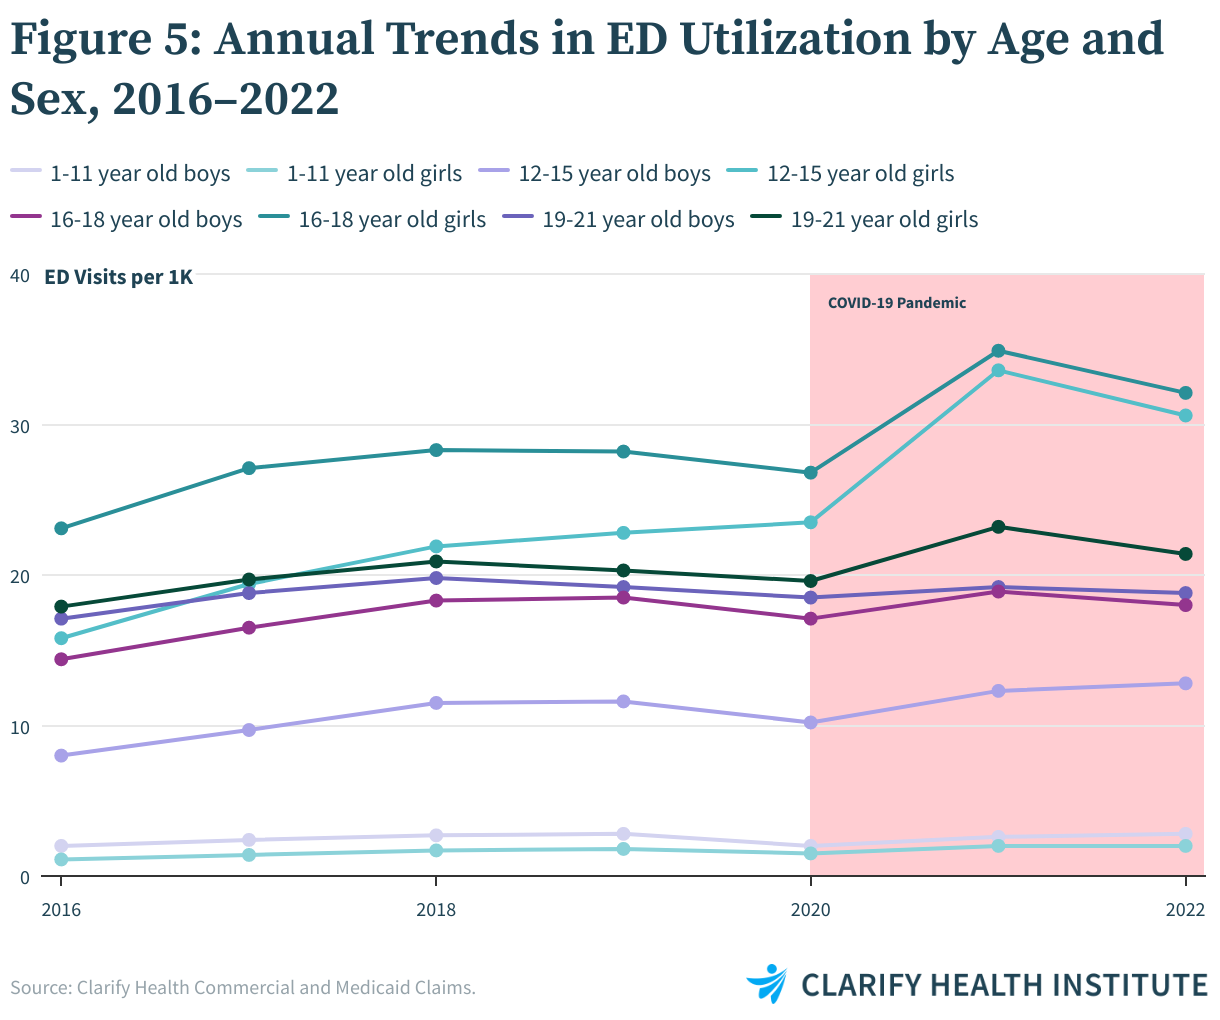 FIGURE 5: ANNUAL TRENDS IN ED UTILIZATION BY AGE AND SEX, 2016–2022